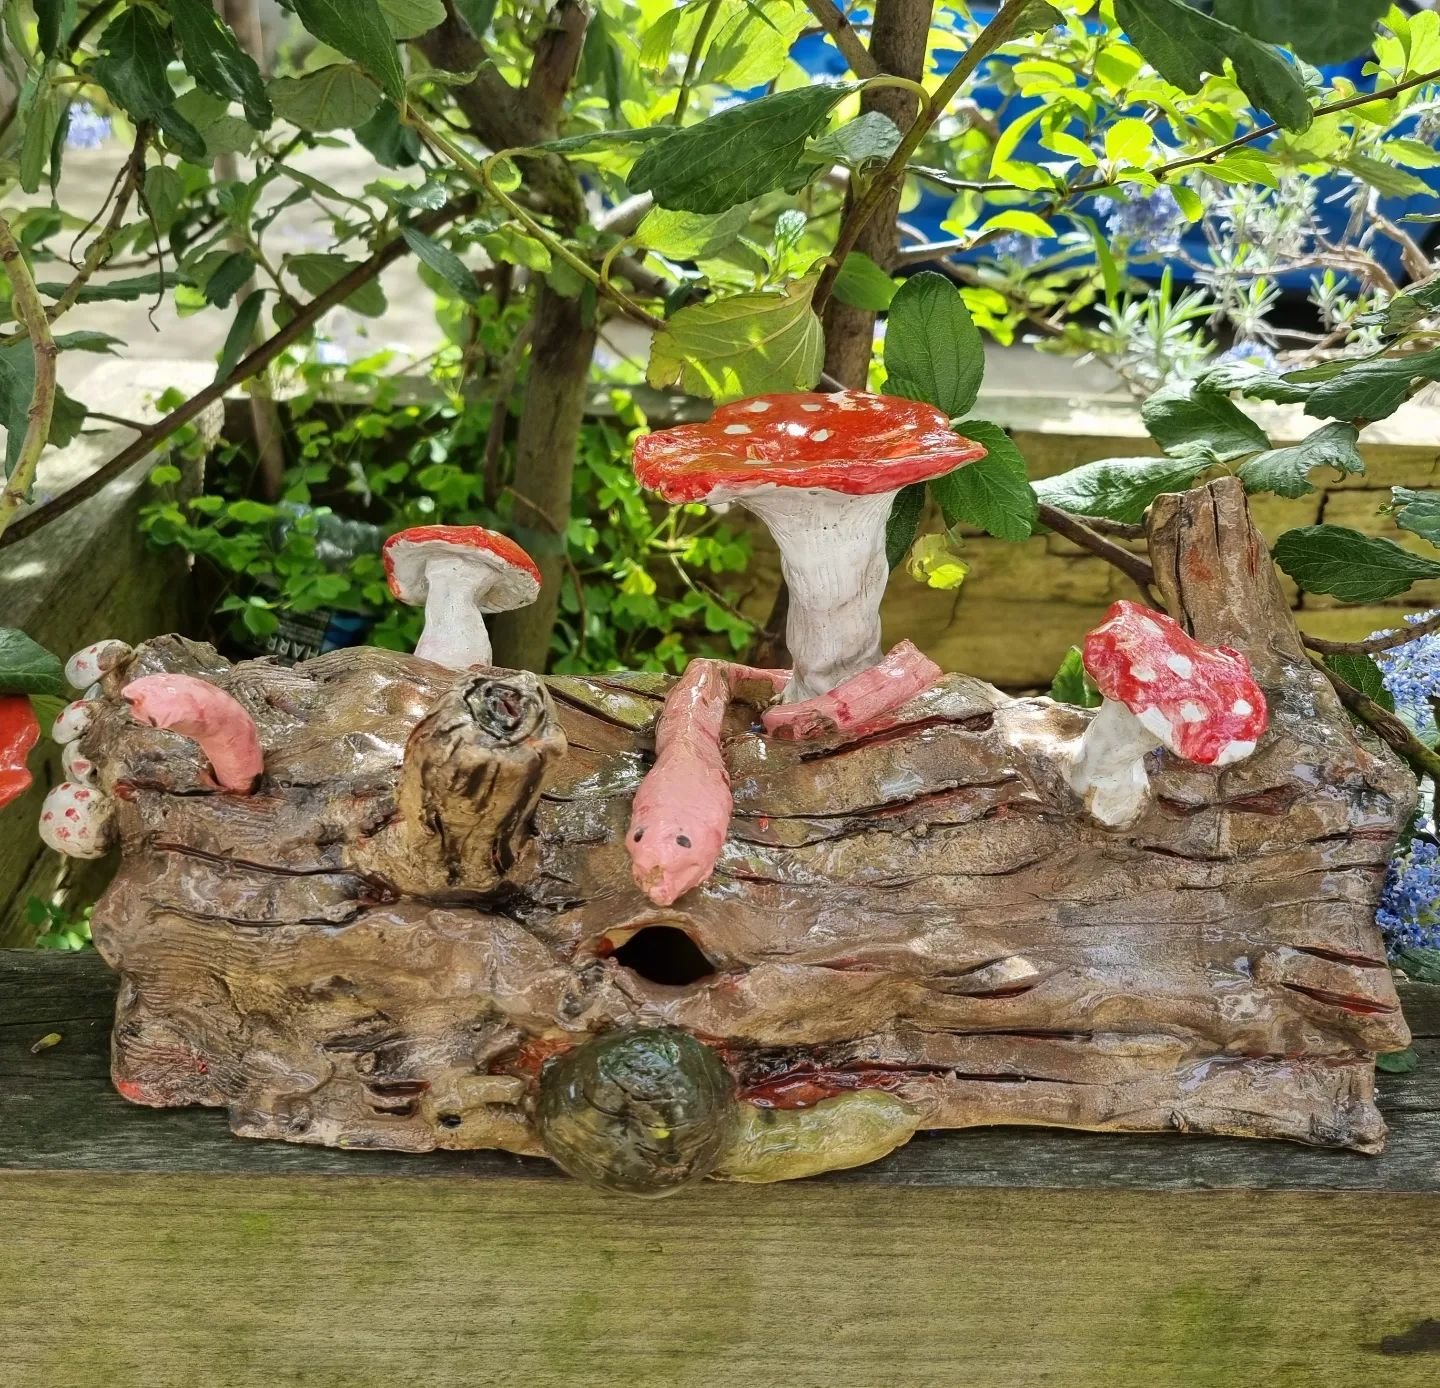 Art can sprout in the most unlikely places.🍄 With a lump of earth, Tirzah has built this garden spectacle as if mother nature herself had handcrafted it.🍄
.
.
.
# ceramics
#pottery